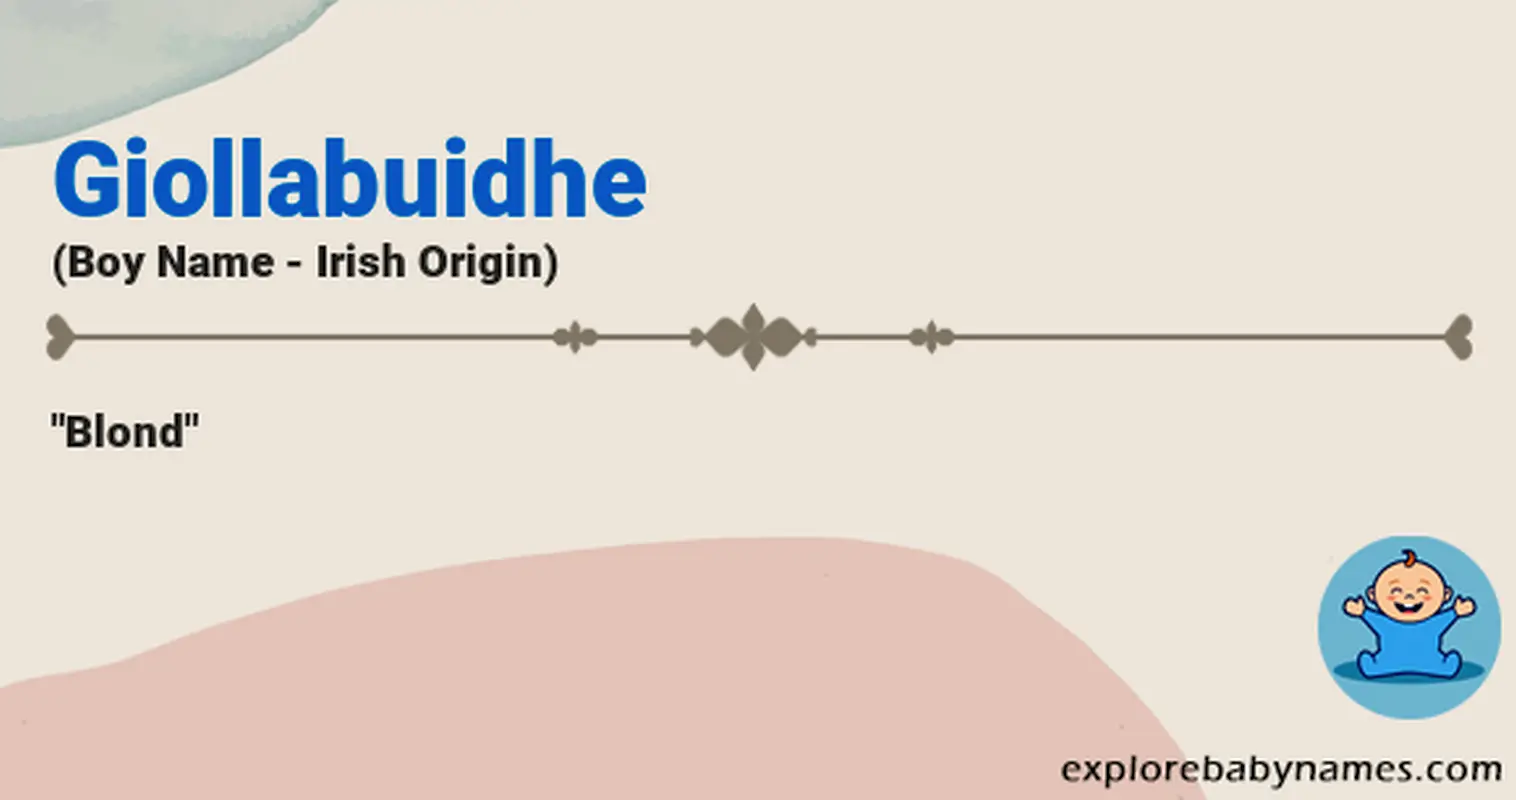 Meaning of Giollabuidhe